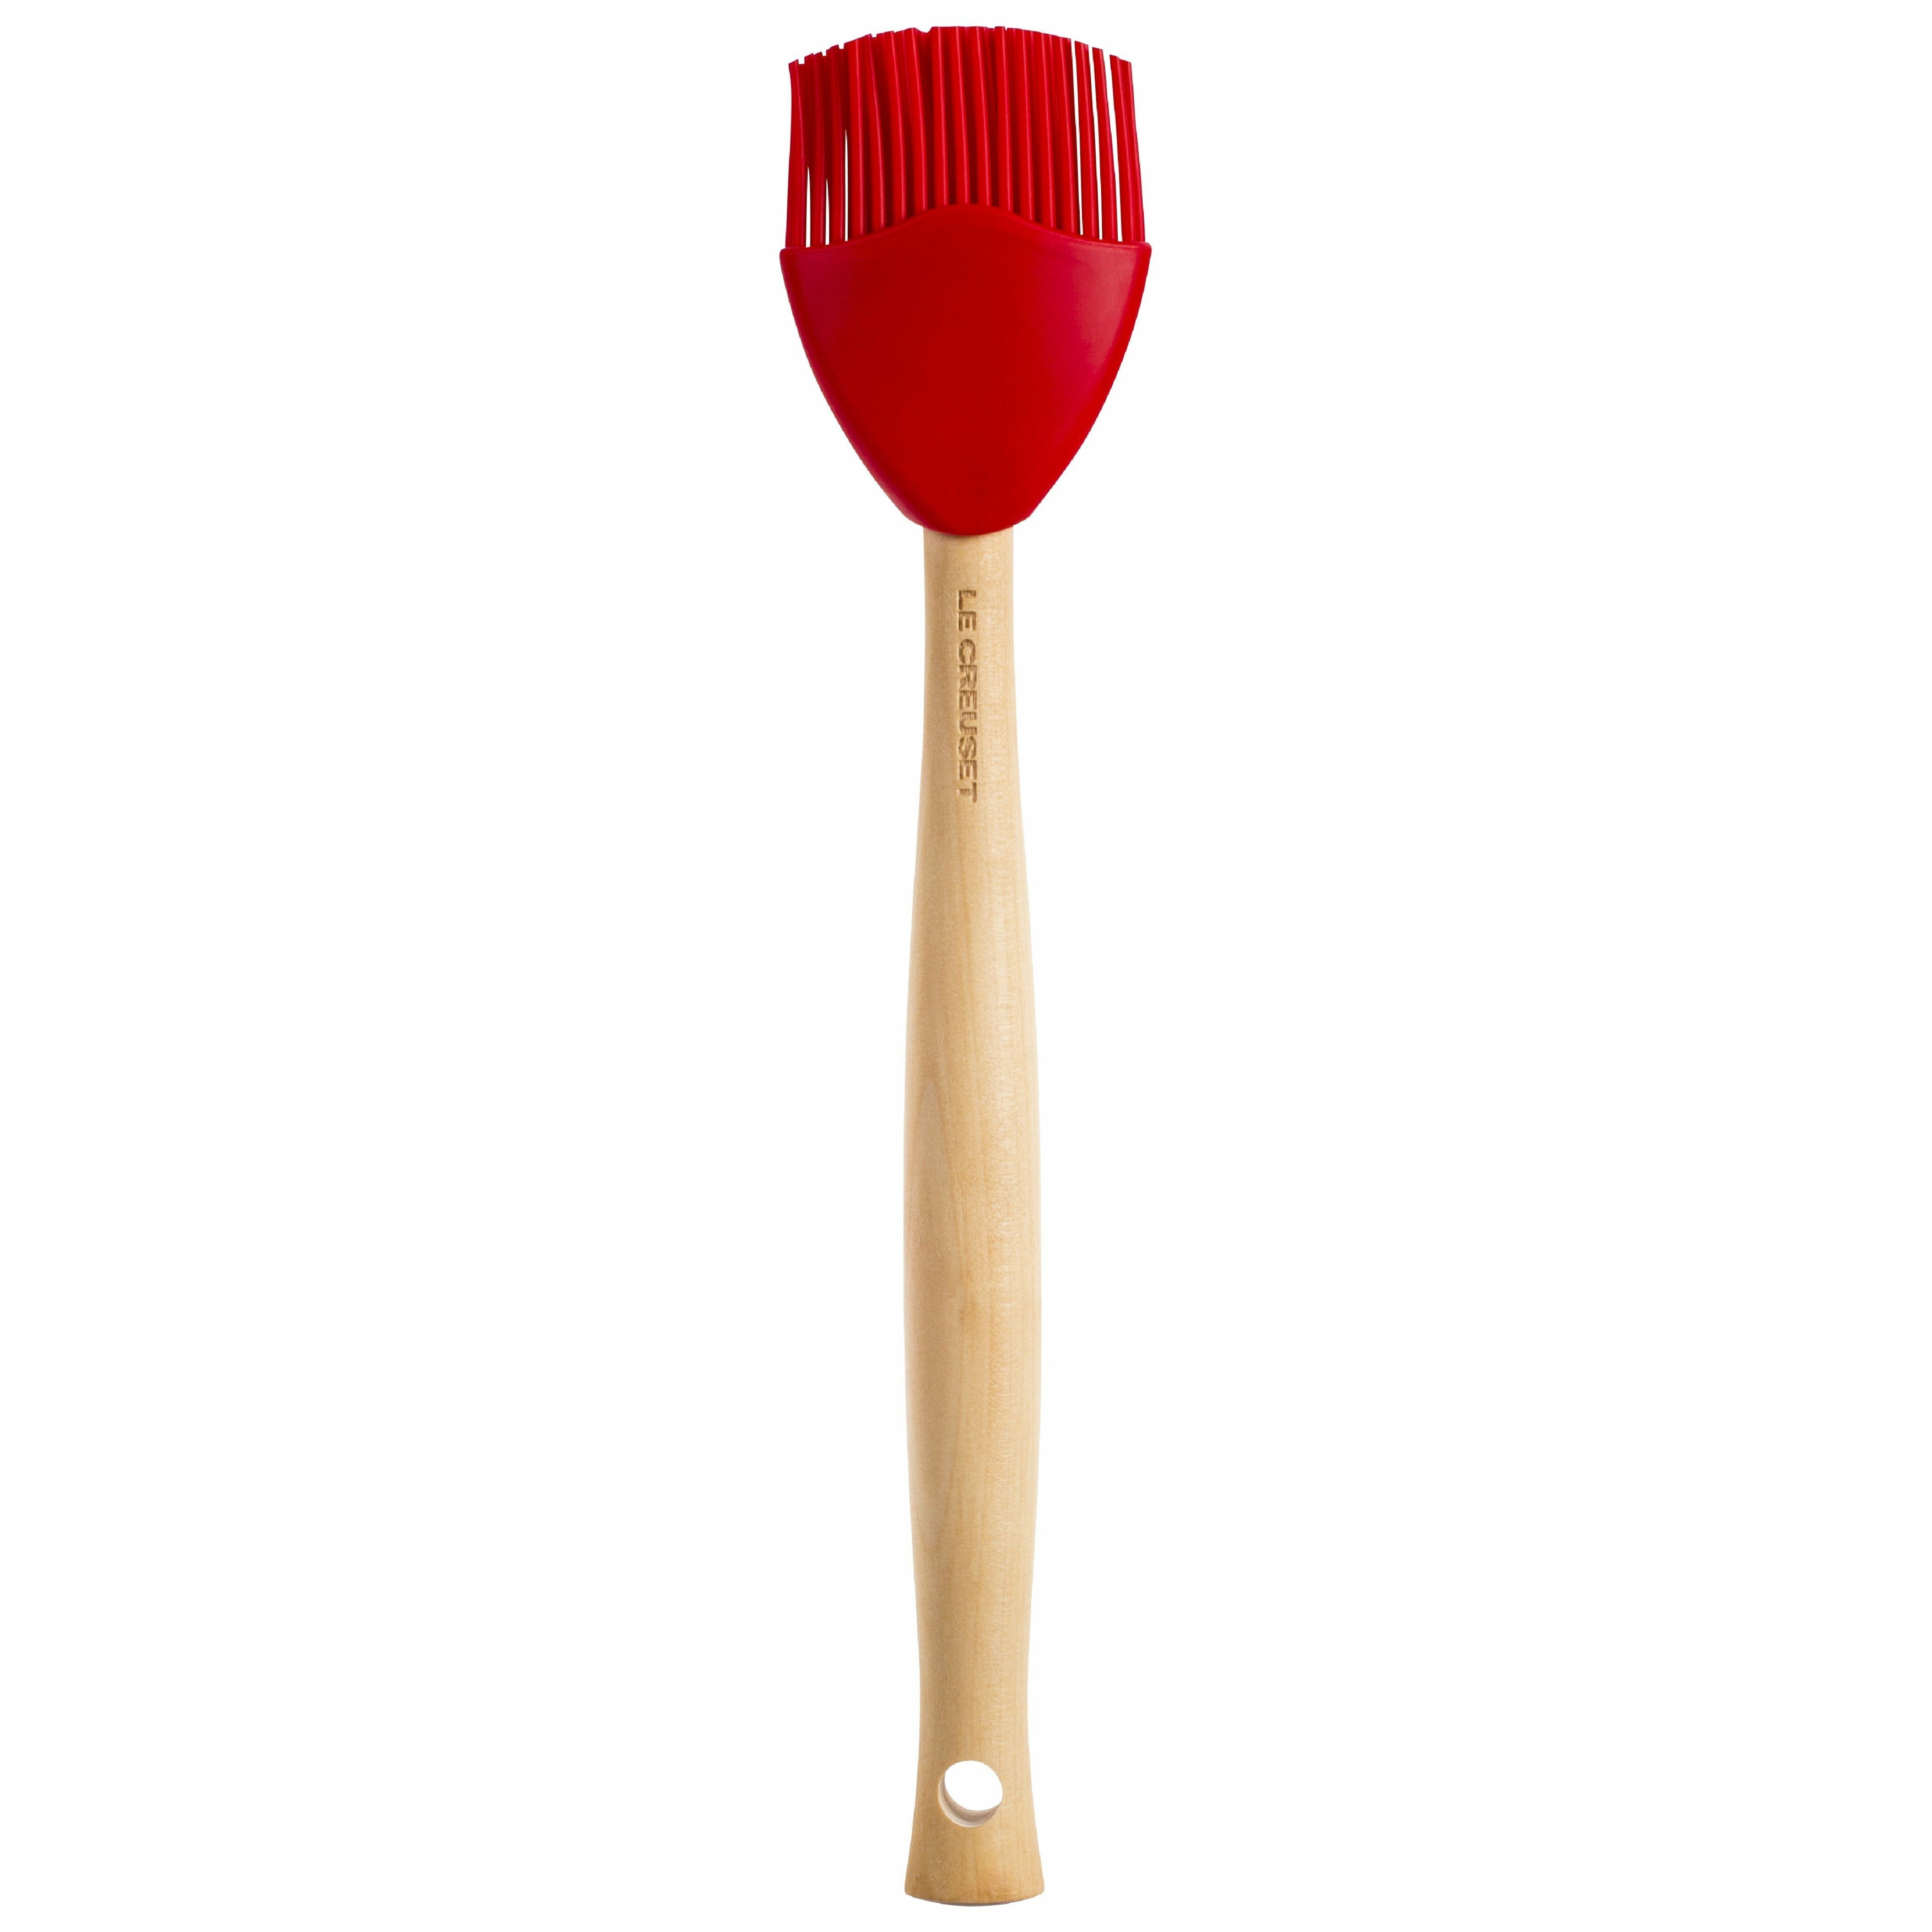 Le Creuset Craft Grill and Baking Brush, Cerise